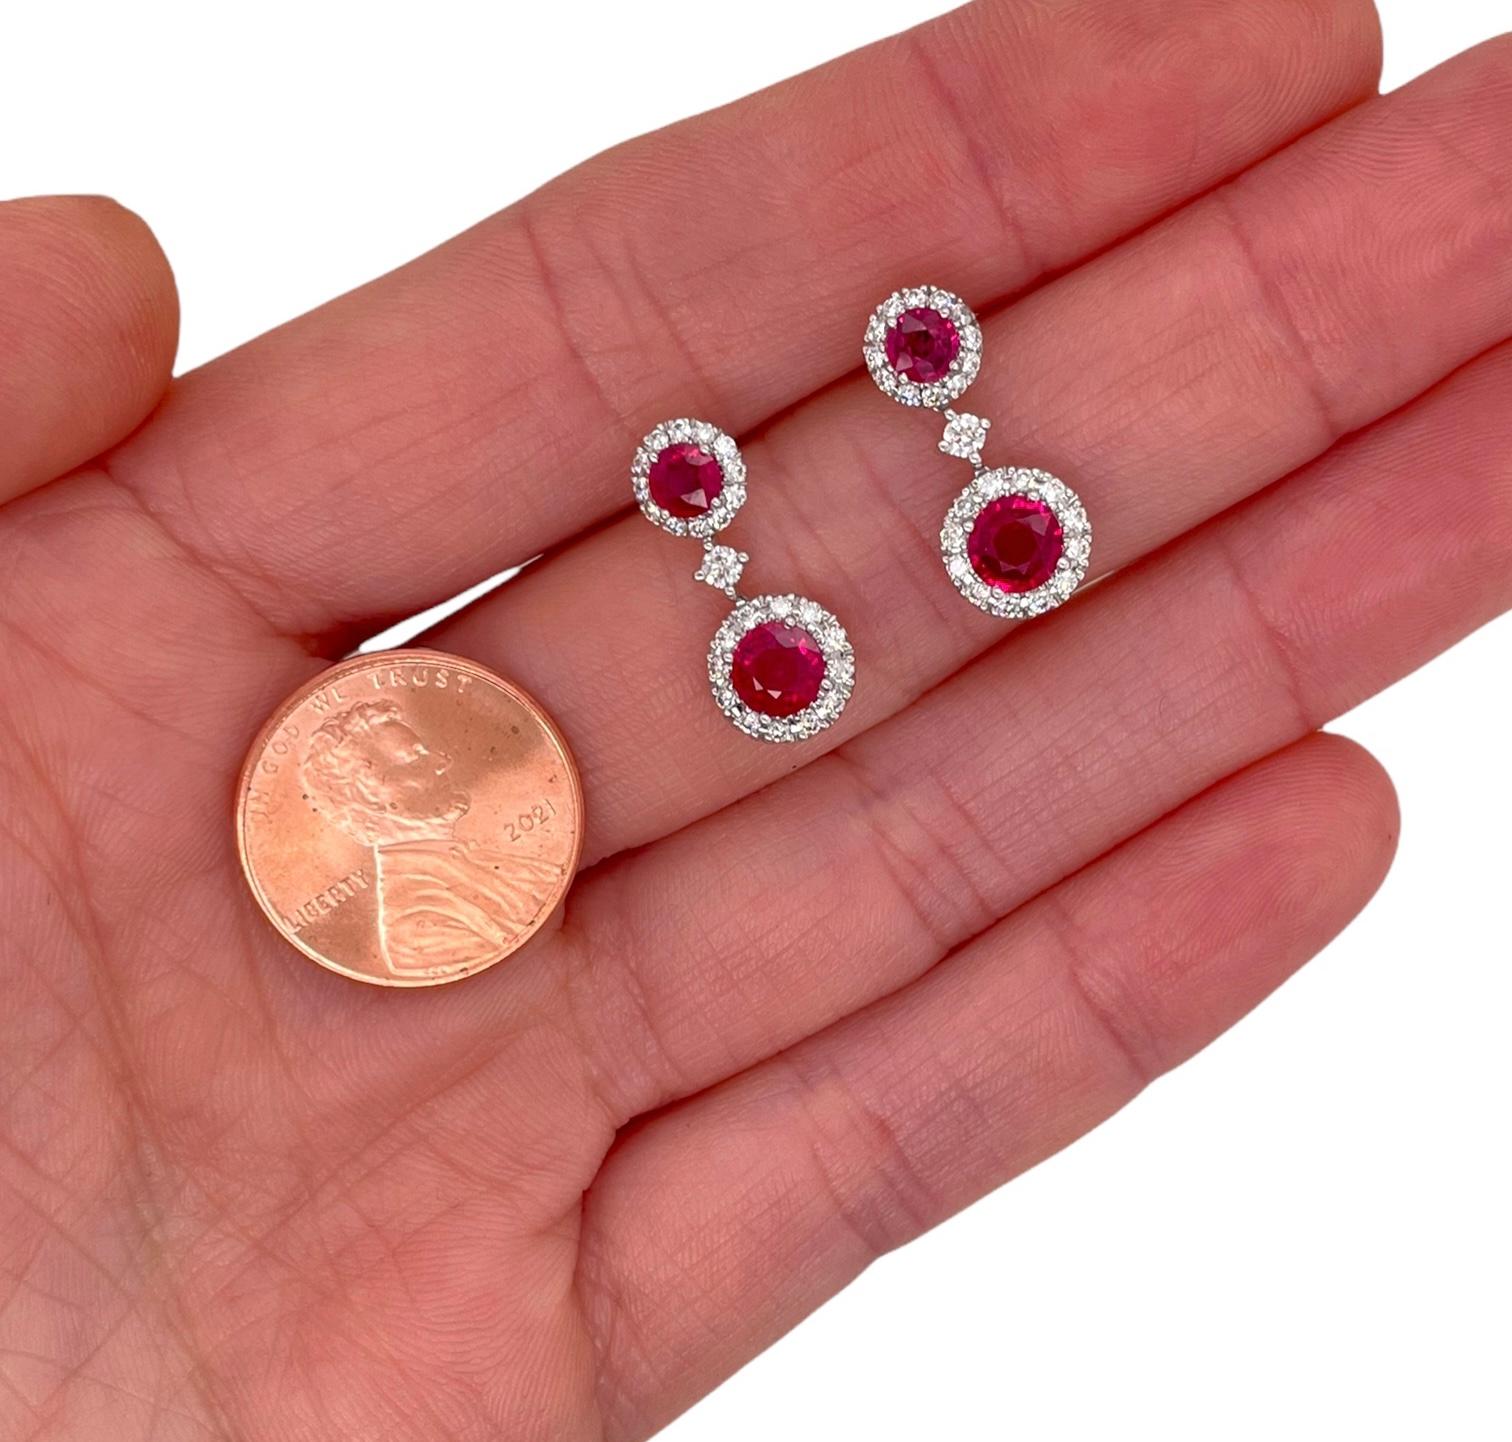 Earrings contain 4 round brilliant rubies, 1.68tcw and round brilliant diamonds, 0.53tcw. Diamonds are near colorless and SI1 in clarity, excellent cut. Stones are mounted within handmade prong settings. Earrings measure 18mm long and have a push